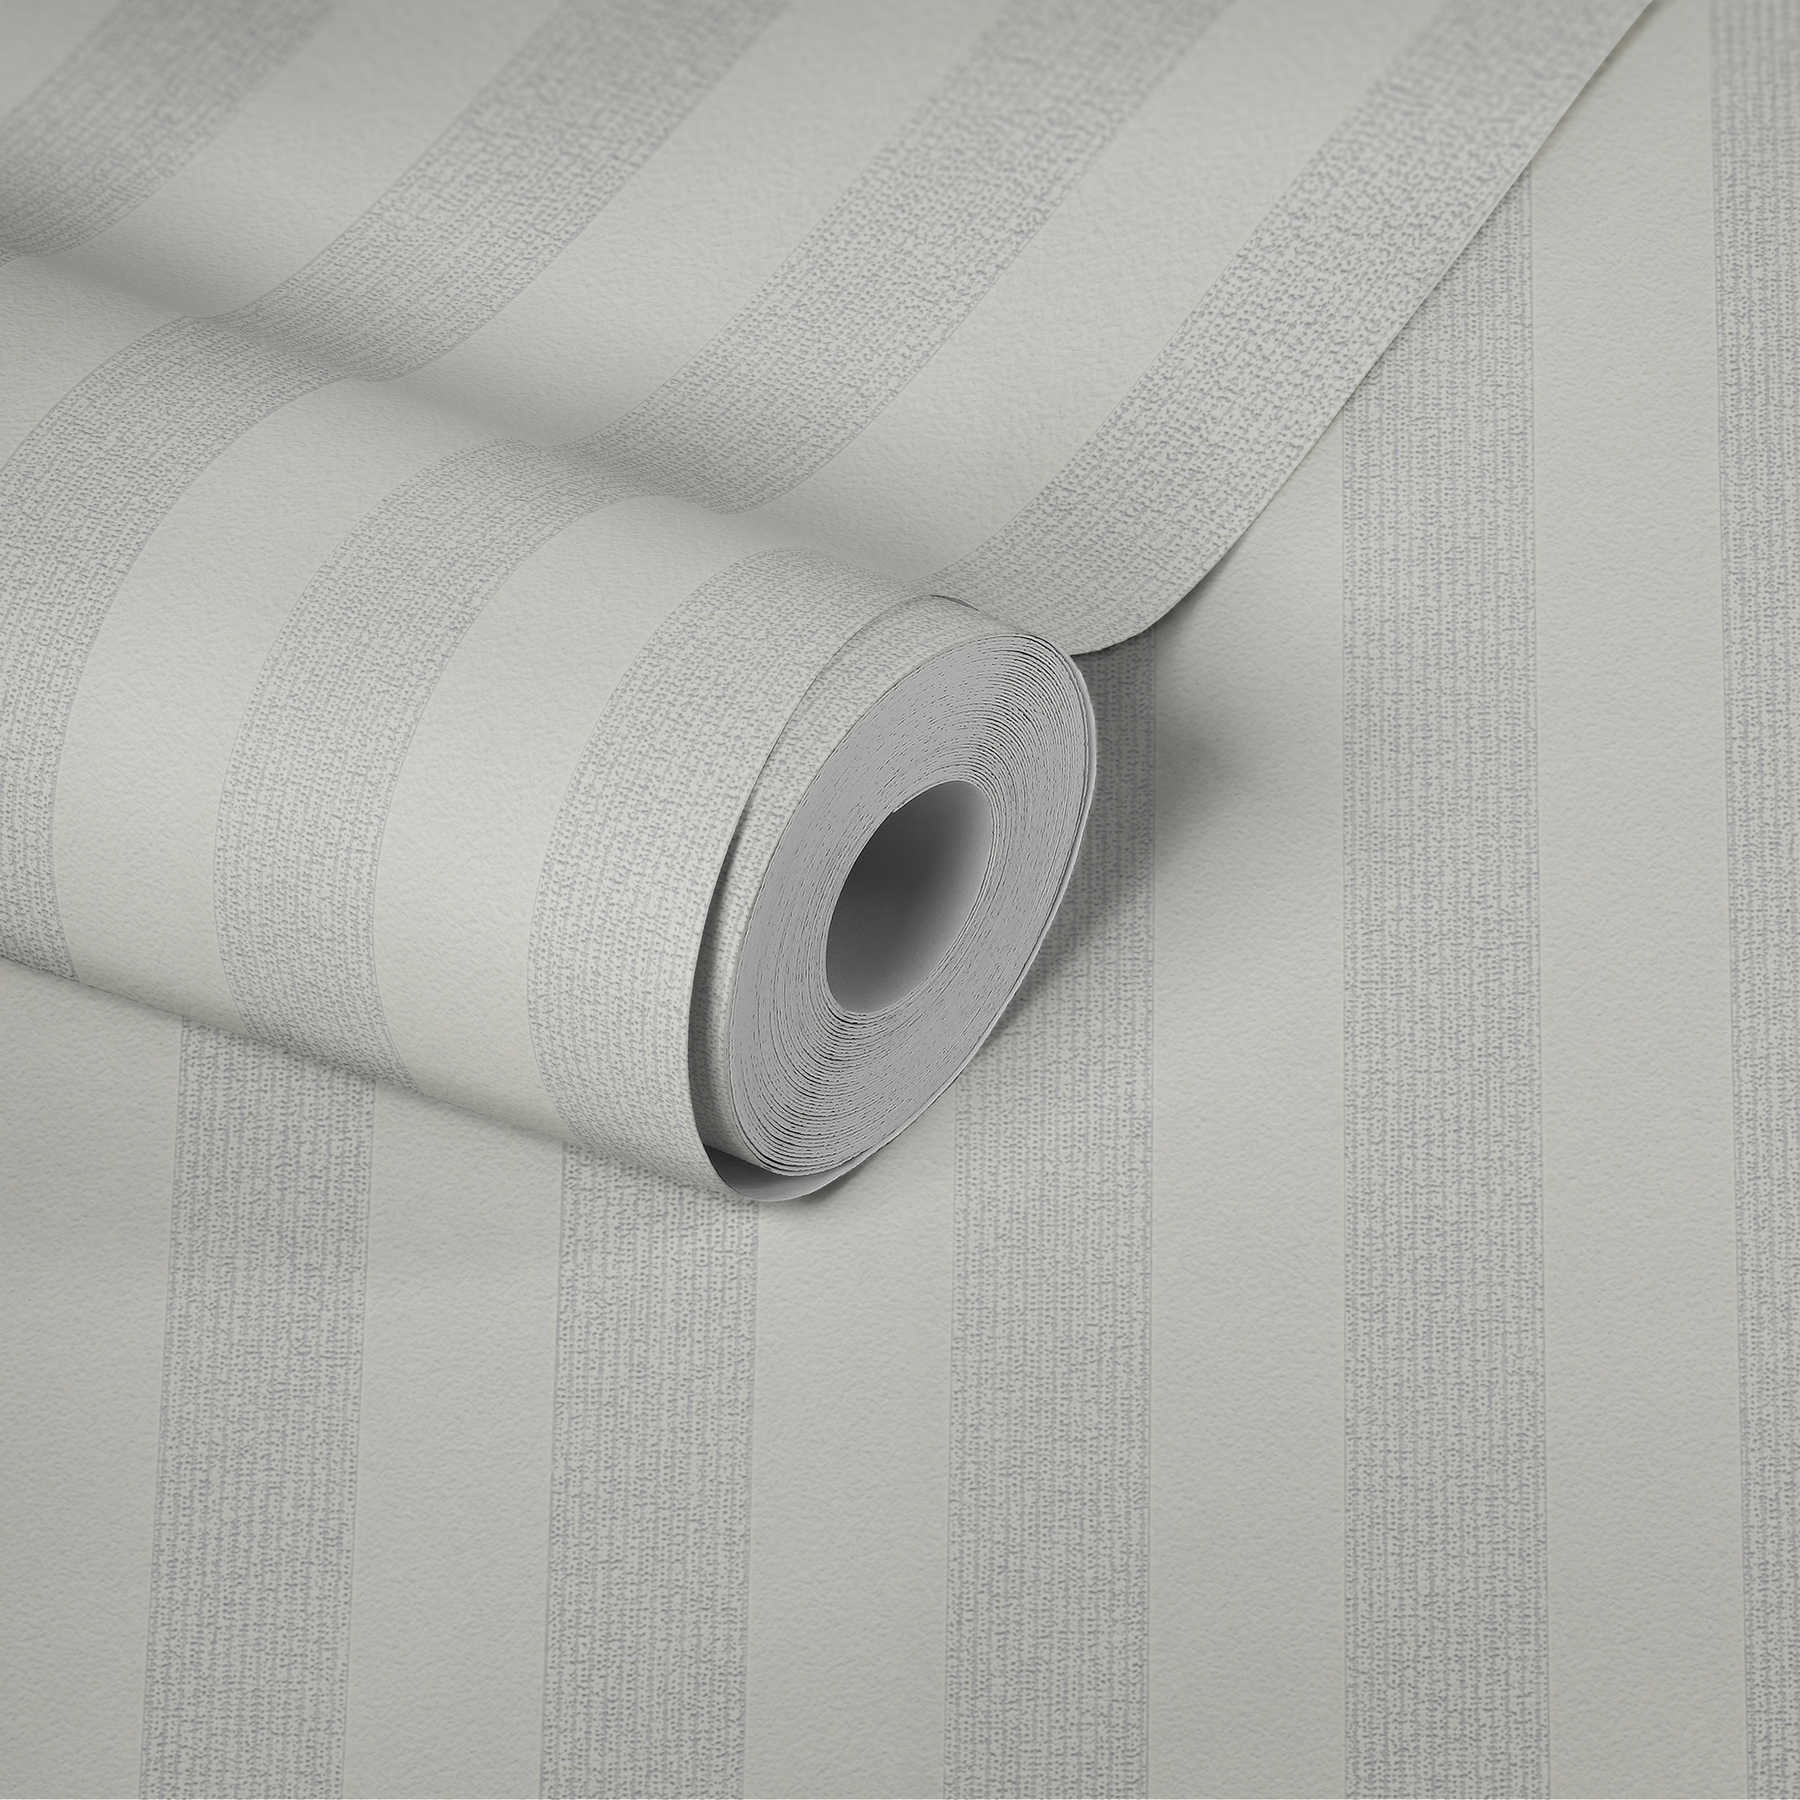             Structured wallpaper stripe pattern, textures - paintable, white
        